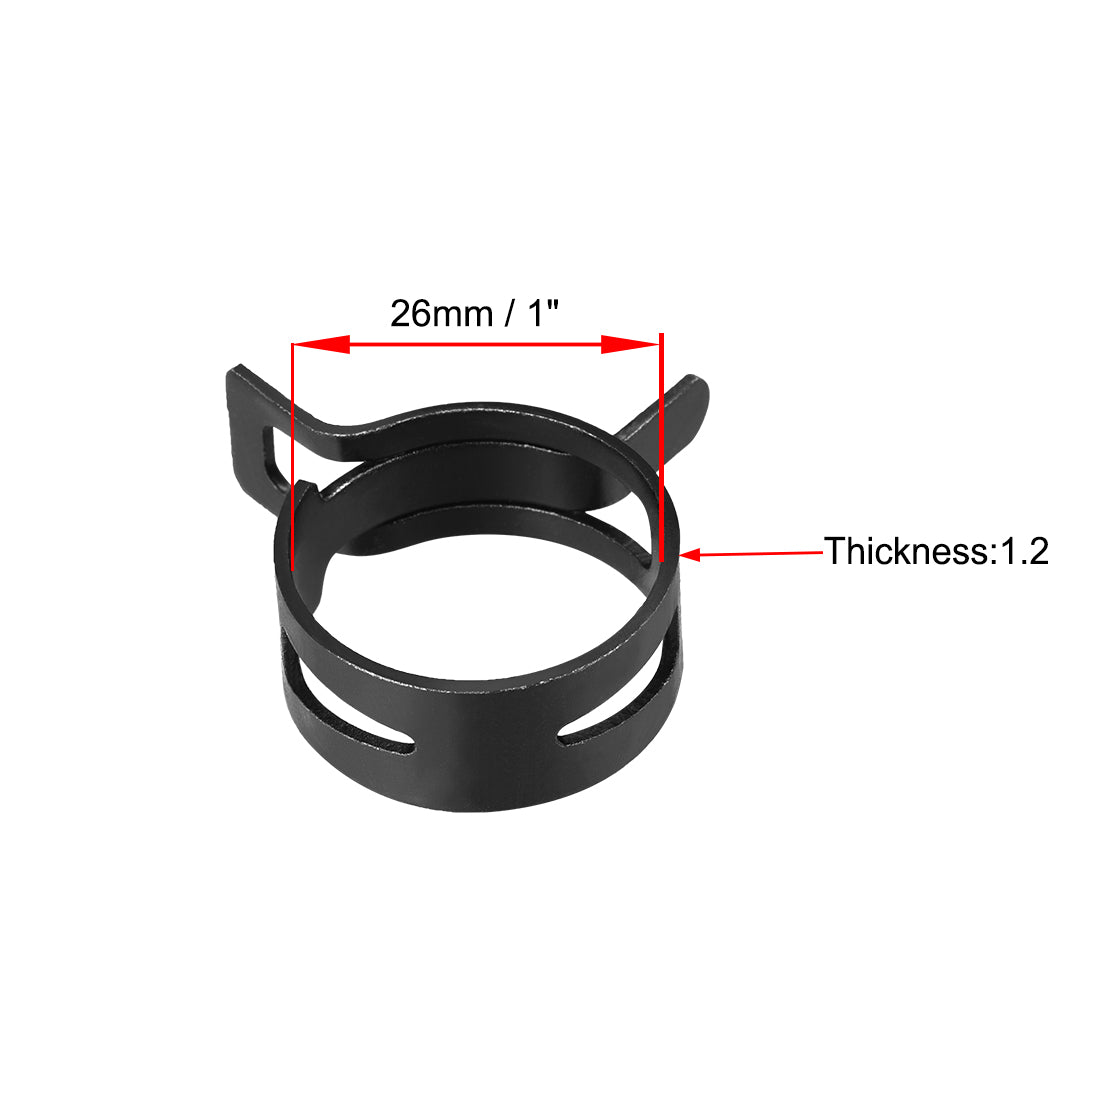 Uxcell Uxcell Steel Band Clamp 9mm Inner Dia Fit 9.5-10.2mm OD Hose for Fuel Line Silicone Tube Spring Clips Black Manganese Steel 10Pcs